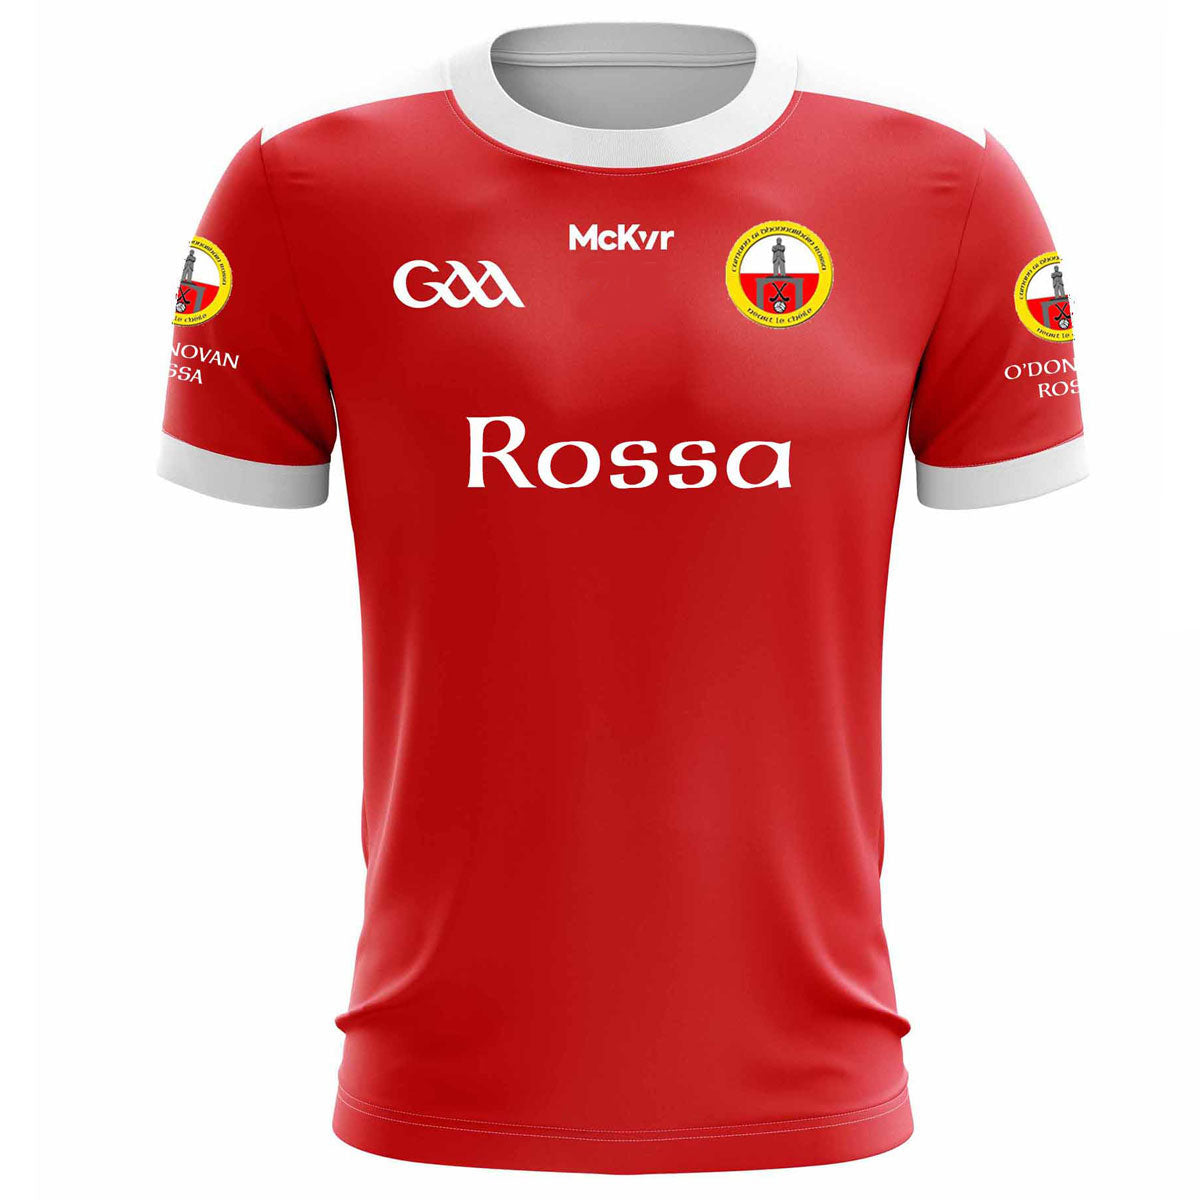 Mc Keever O'Donovan Rossa GAA Playing Jersey - Womens - Red/White